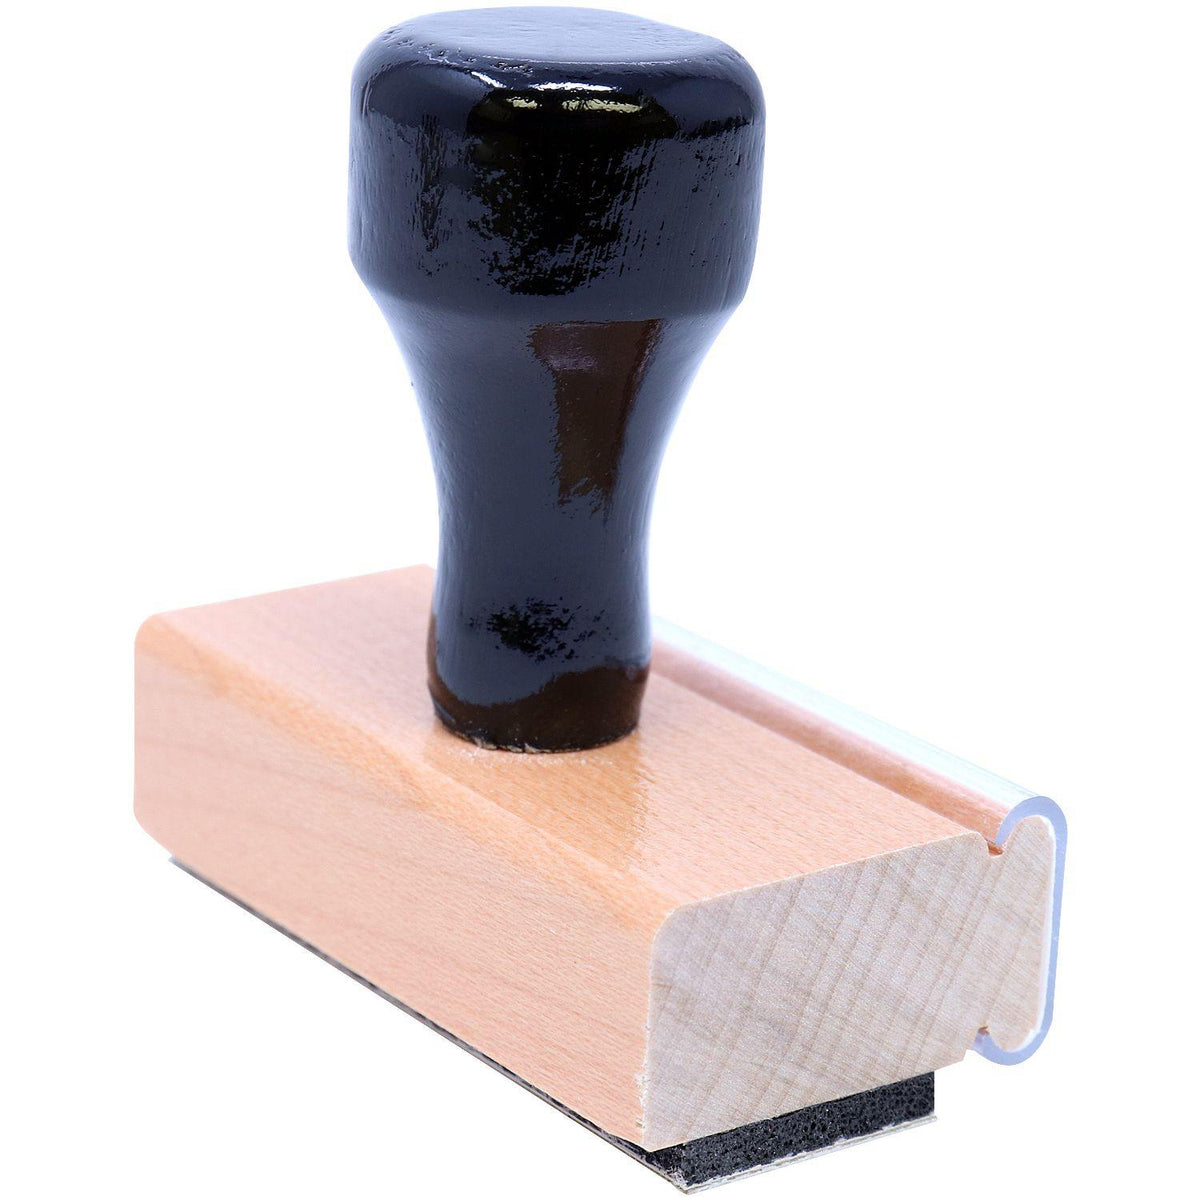 Large Skinny Rush Rubber Stamp - Engineer Seal Stamps - Brand_Acorn, Impression Size_Large, Stamp Type_Regular Stamp, Type of Use_Postal &amp; Mailing, Type of Use_Shipping &amp; Receiving